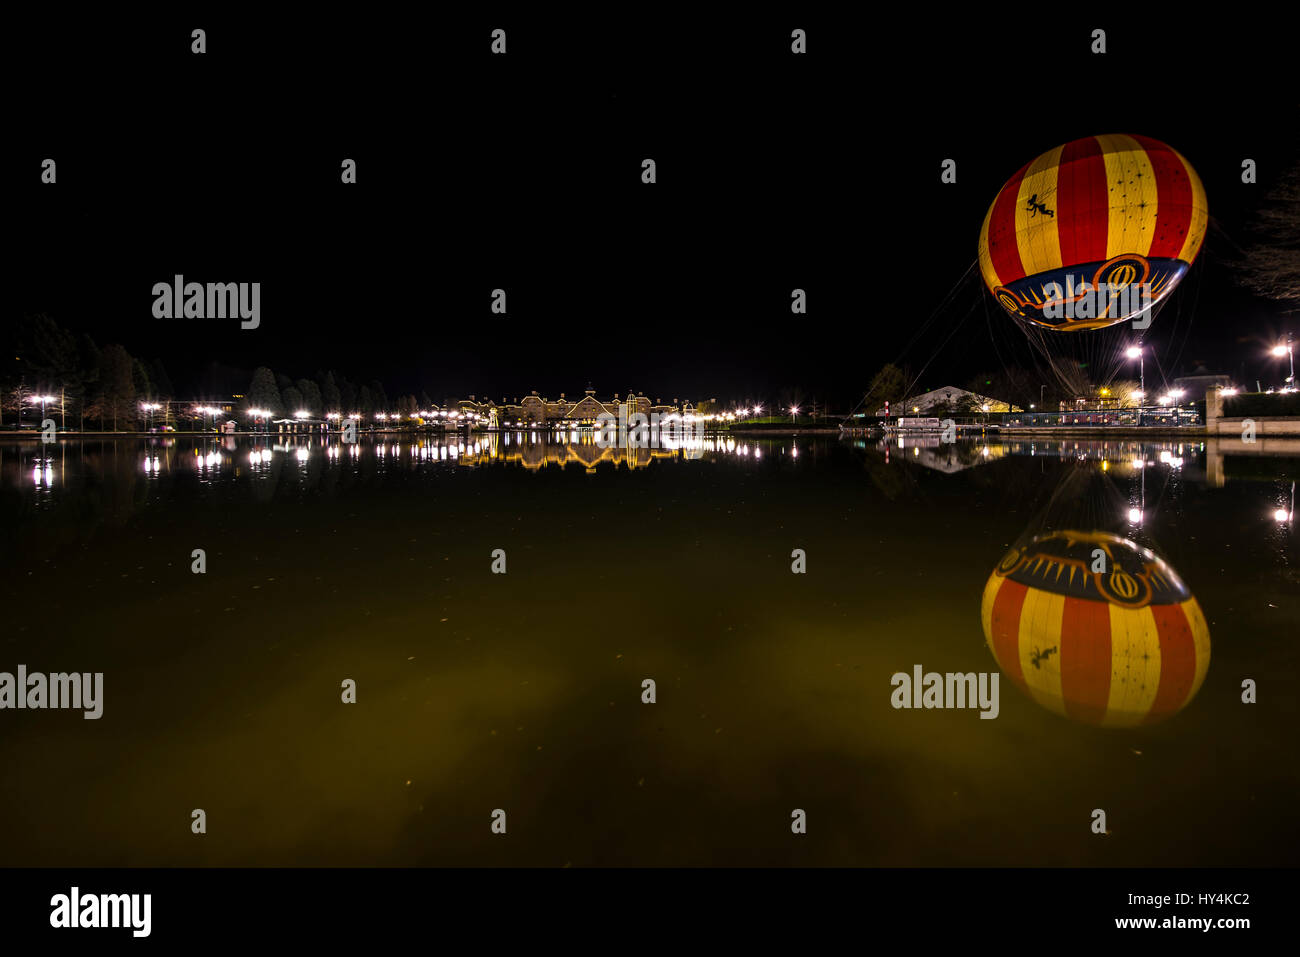 Newport Bay Club hotel at night across Lake Disney in the Disney Resort in Marne-la-Vallée Paris, France and Panoramagique balloon with reflection Stock Photo